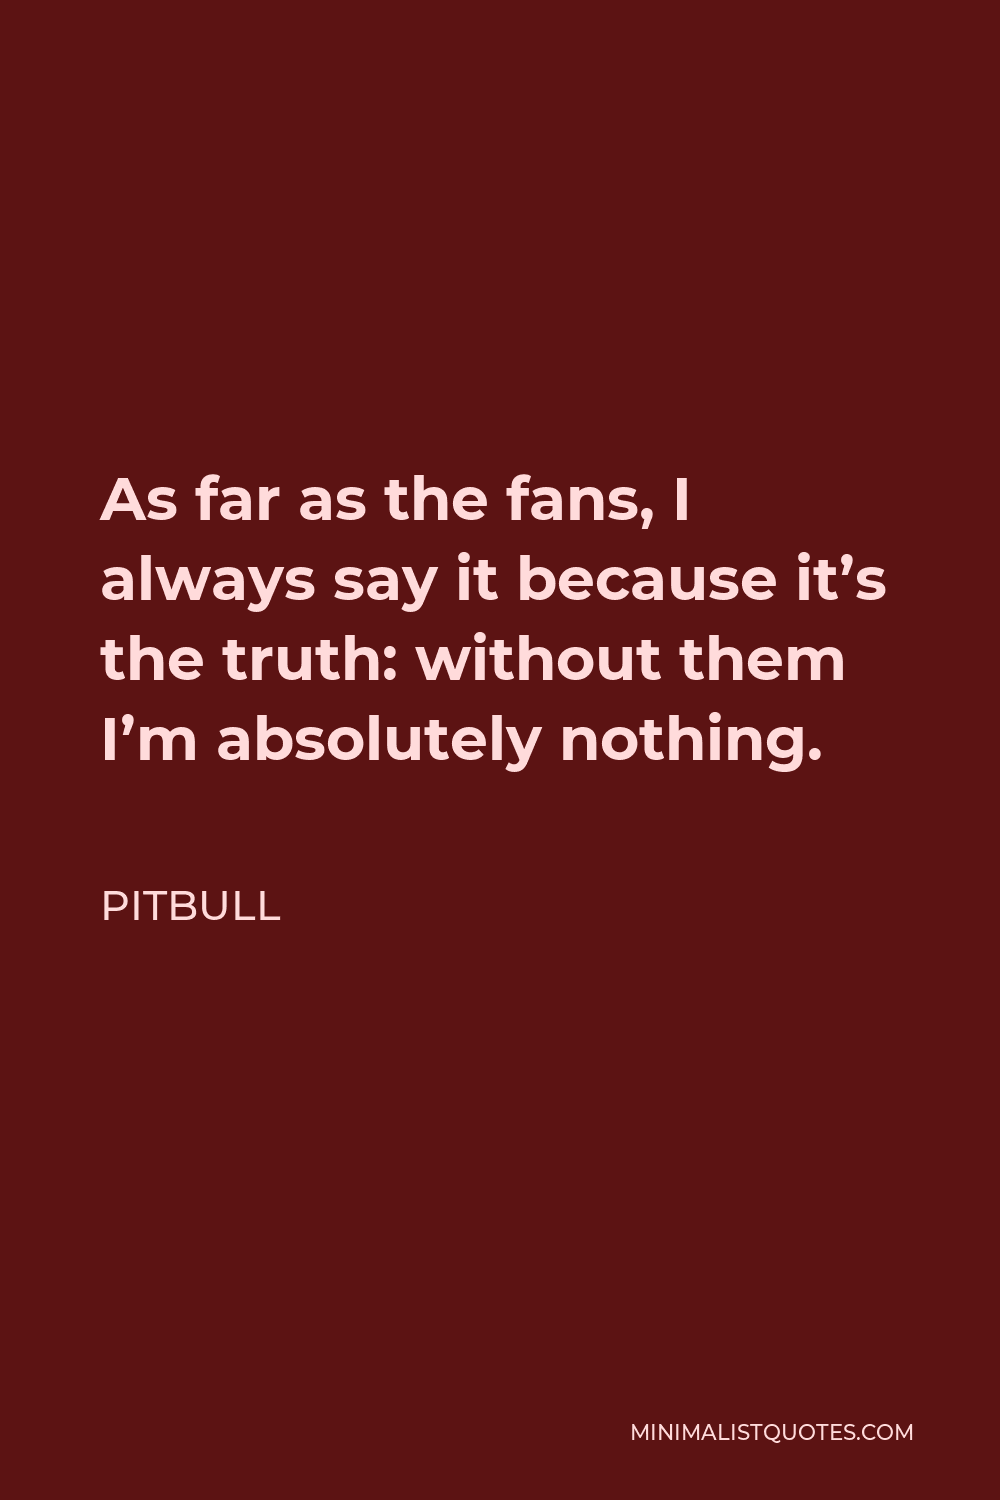 Pitbull Quote: As far as the fans, I always say it because it's the ...